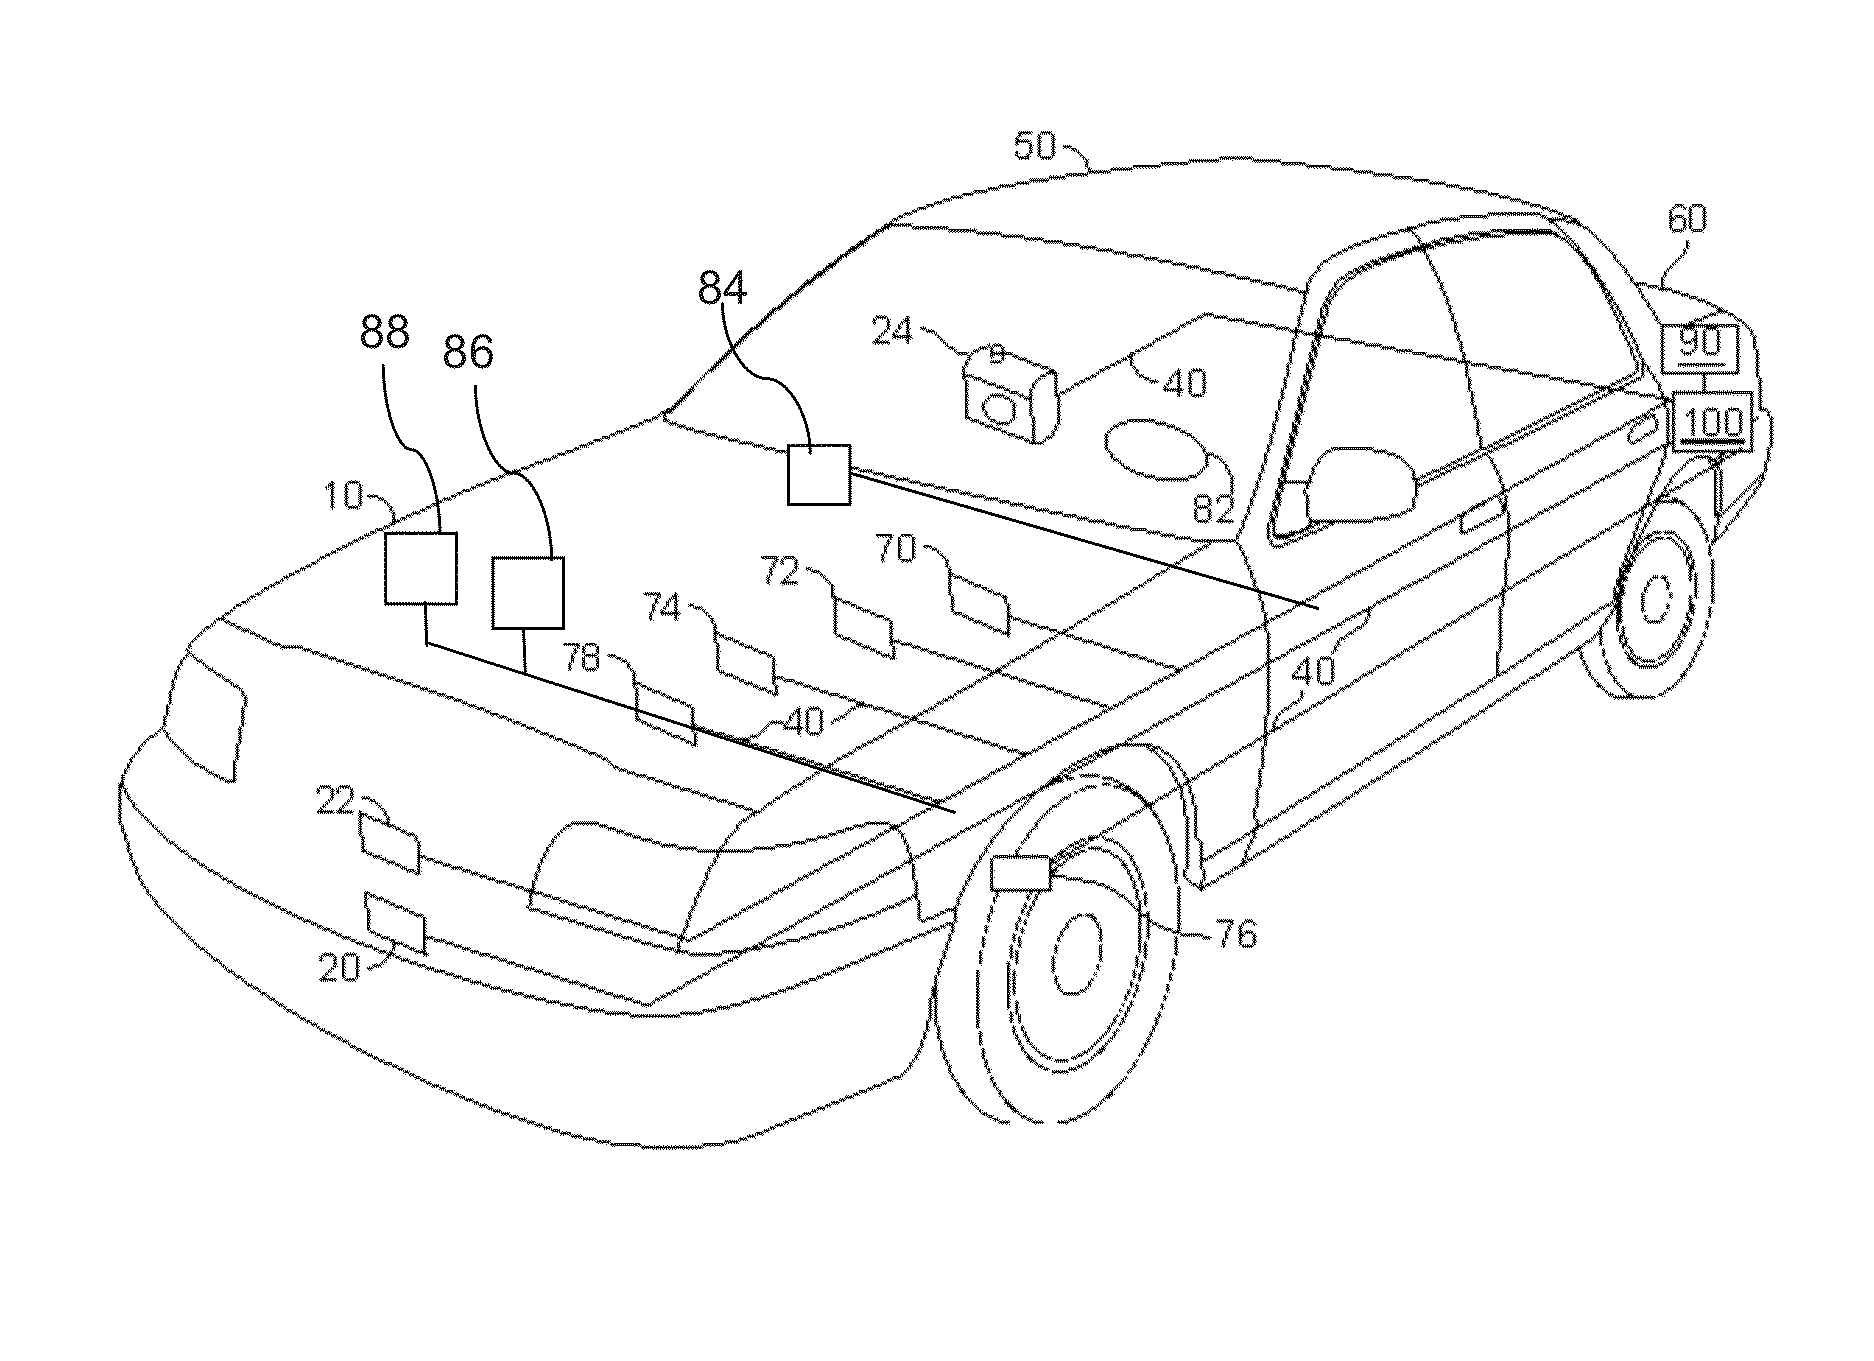 System and method for enhanced vehicle control